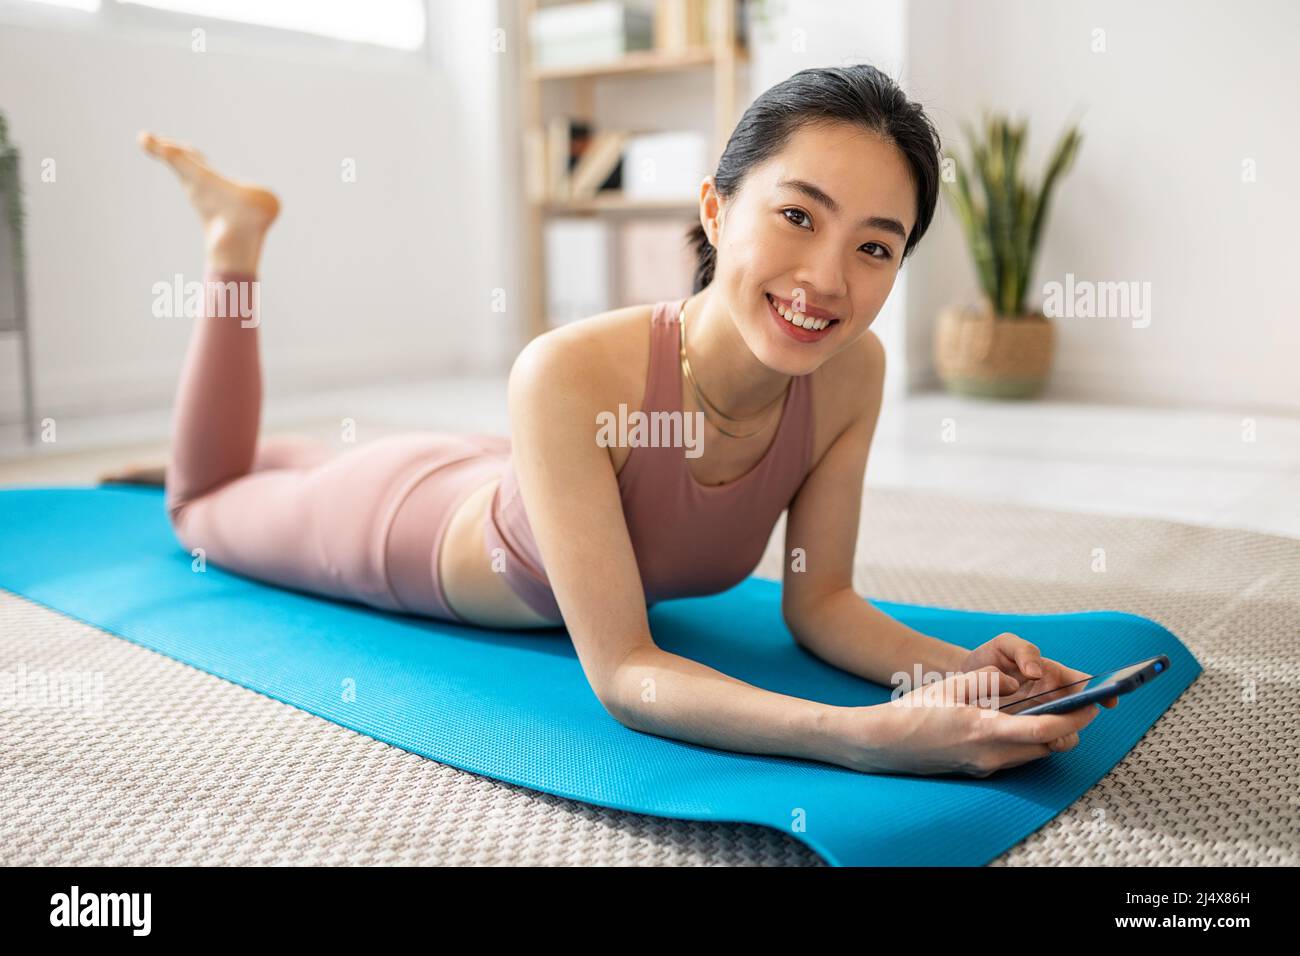 Smiling asian woman using mobile phone while relaxing after exercise workout Stock Photo